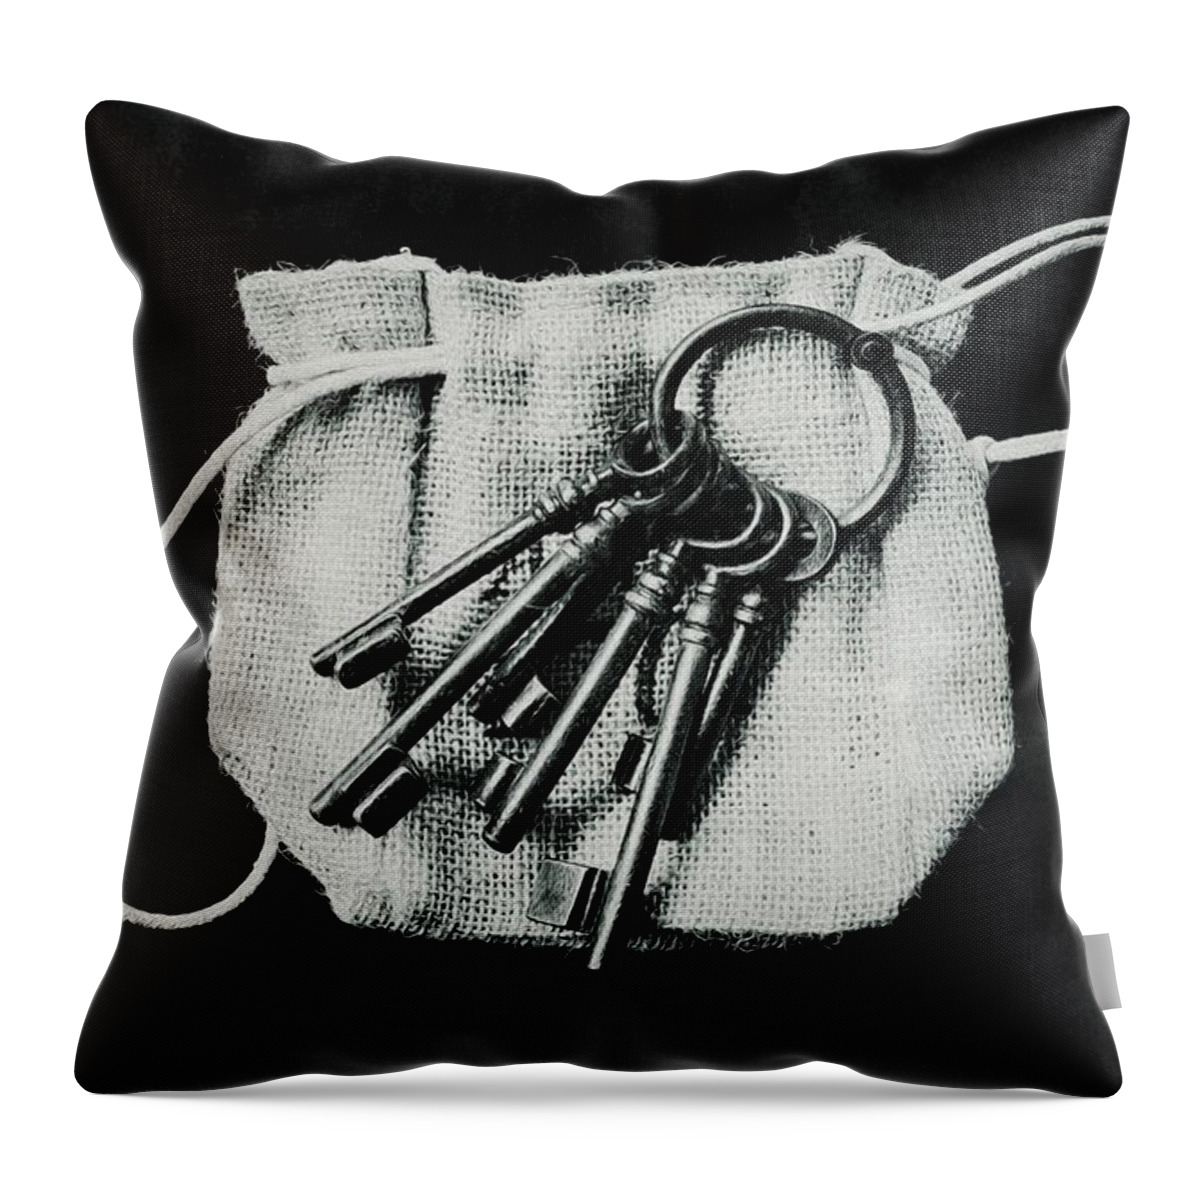 The Keys Throw Pillow featuring the photograph The Keys by Marco Oliveira